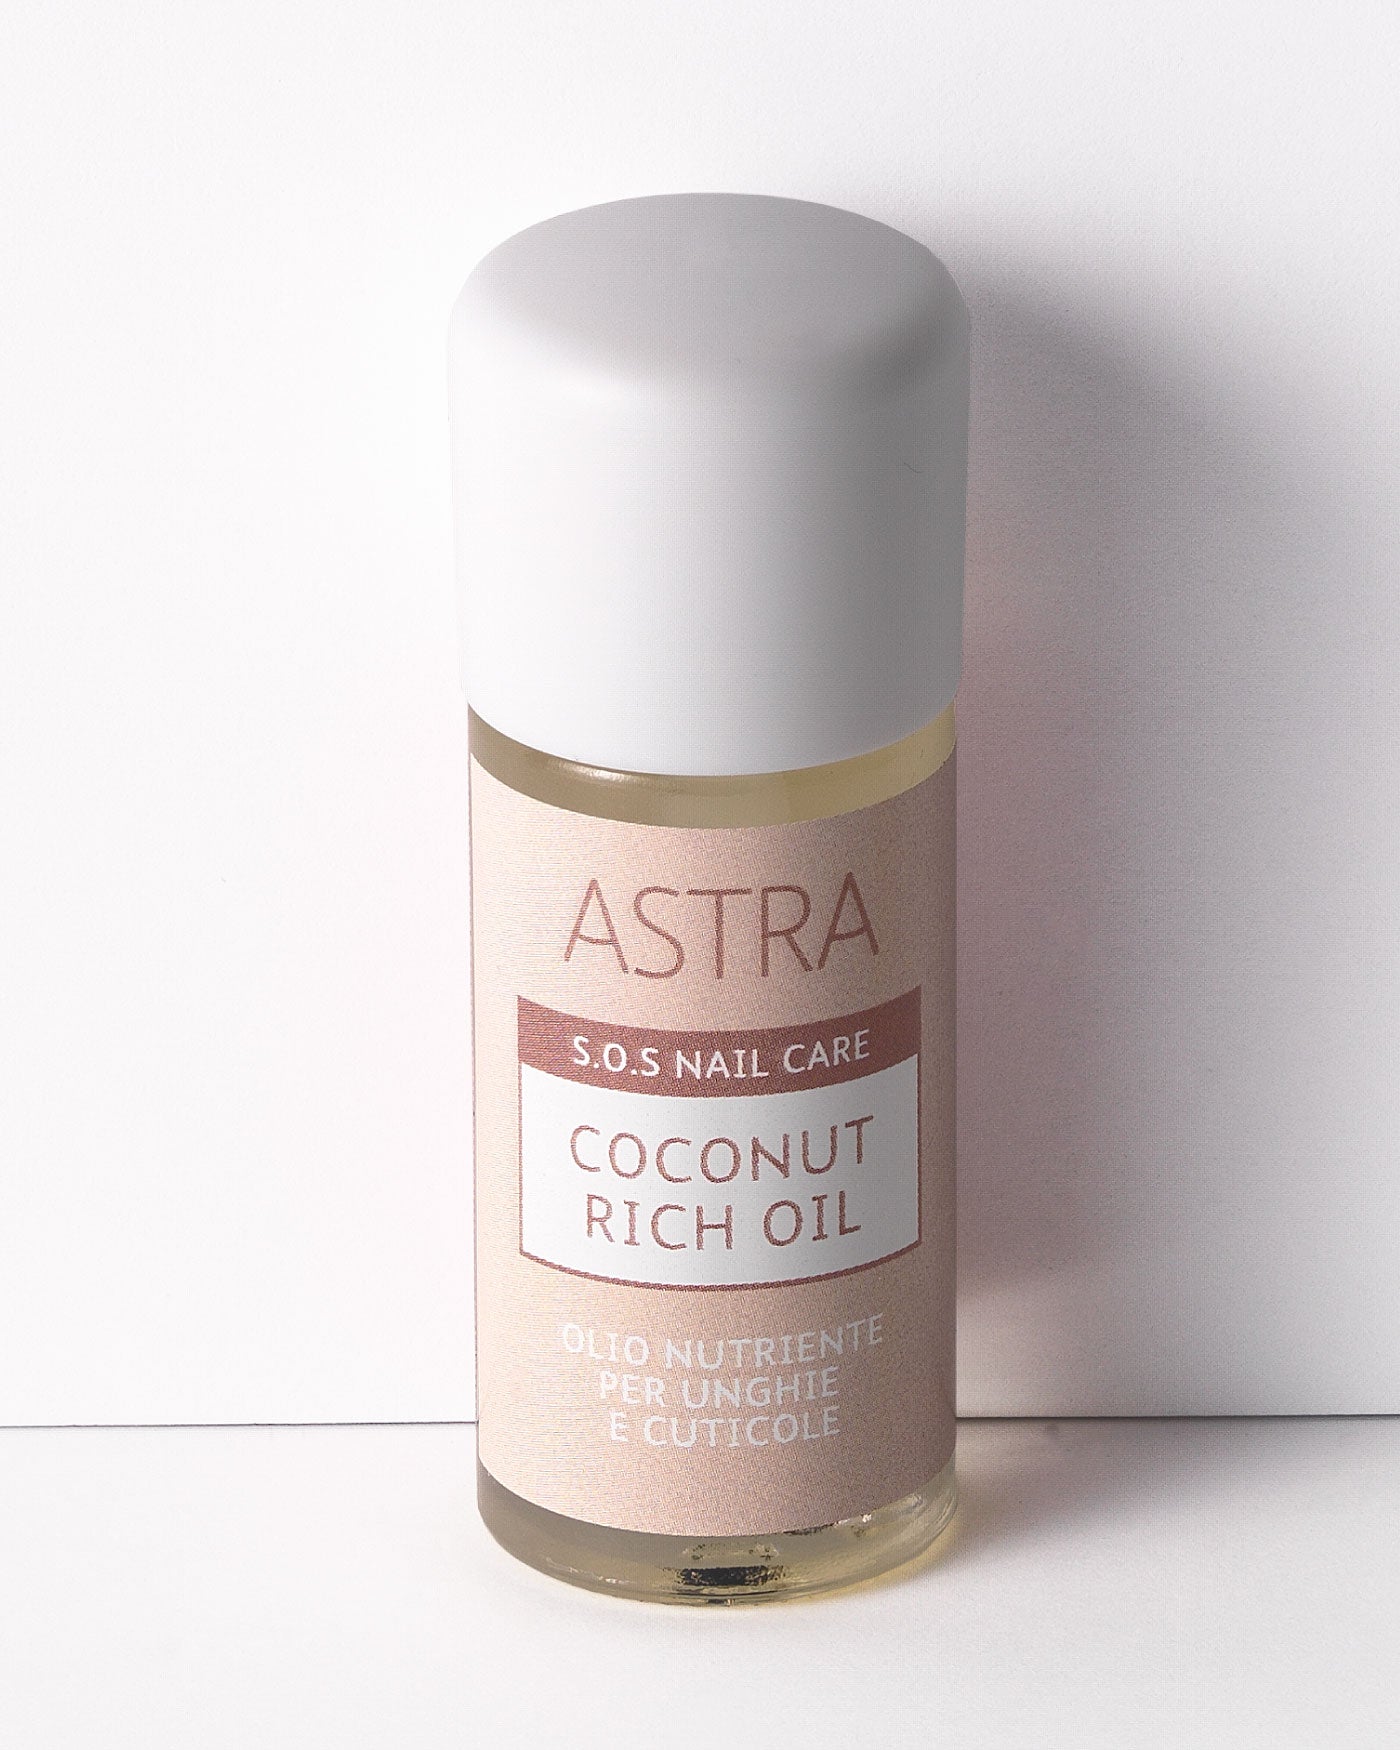 S.O.S NAIL CARE - COCONUT RICH OIL - Make-Up - Astra Make-Up